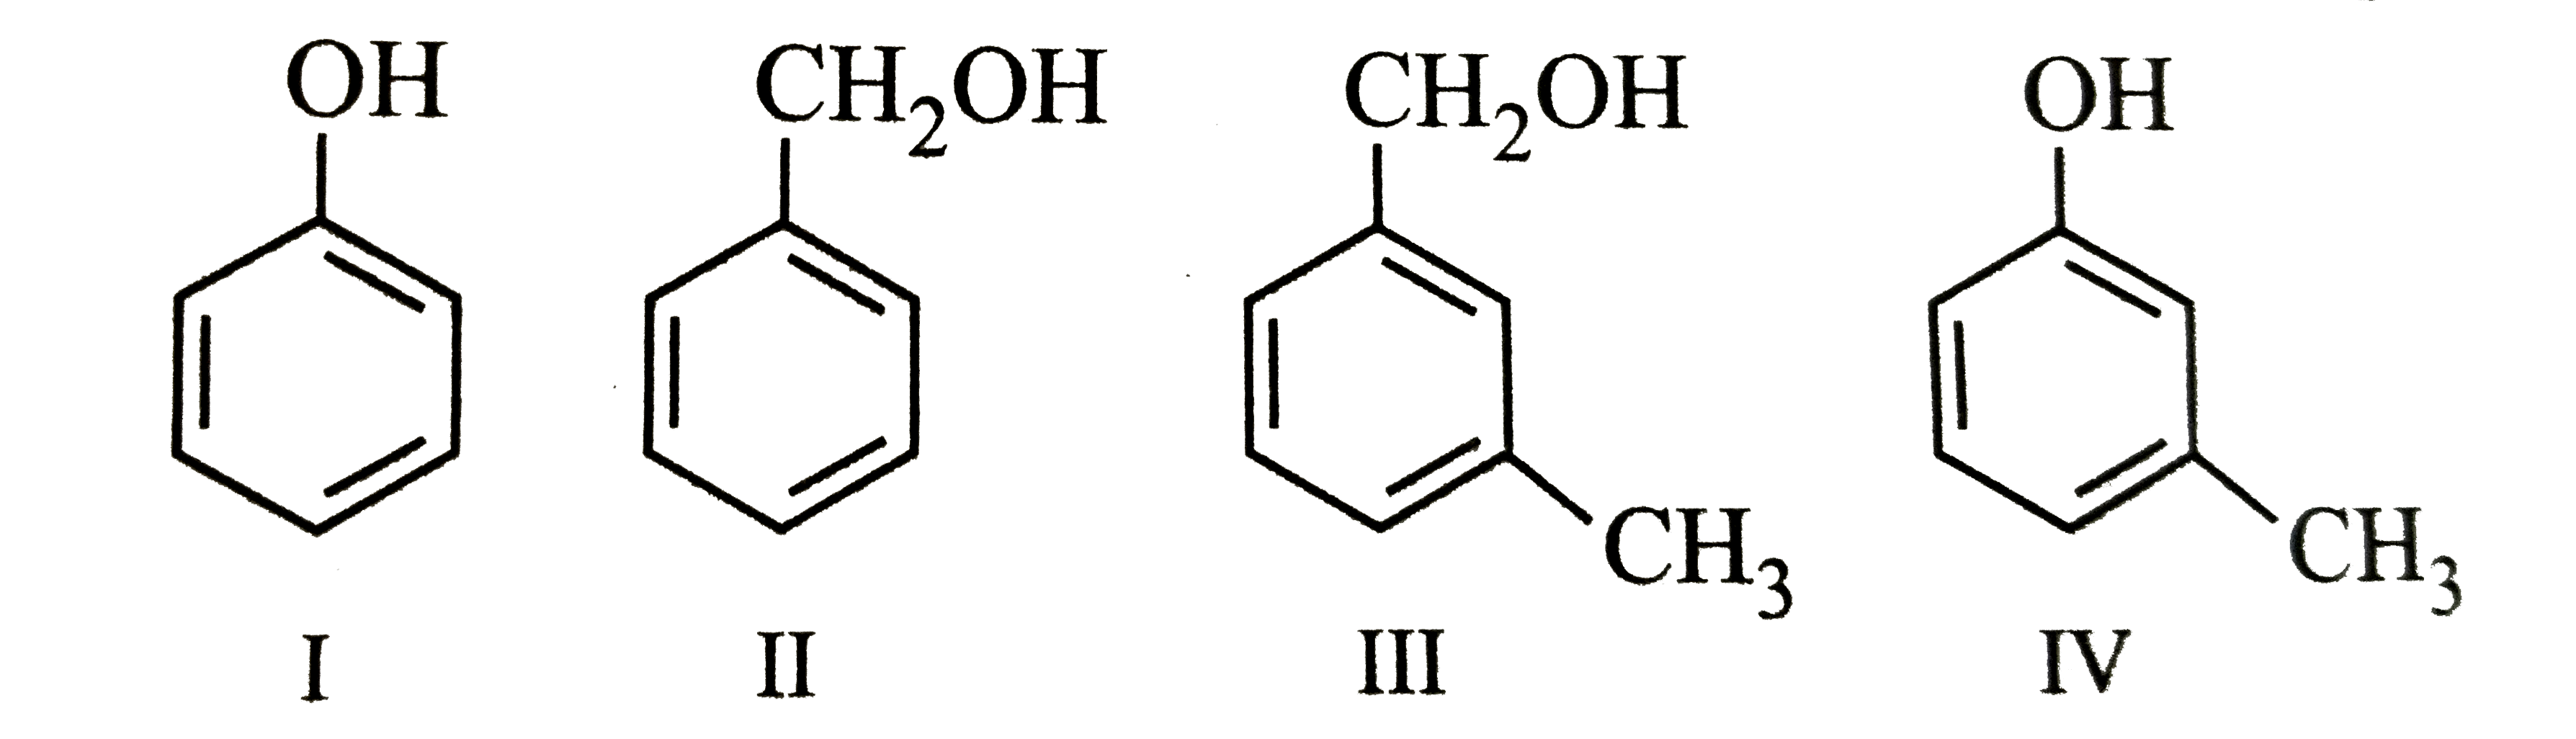 Which of the following compunds is aromatic alcohol?